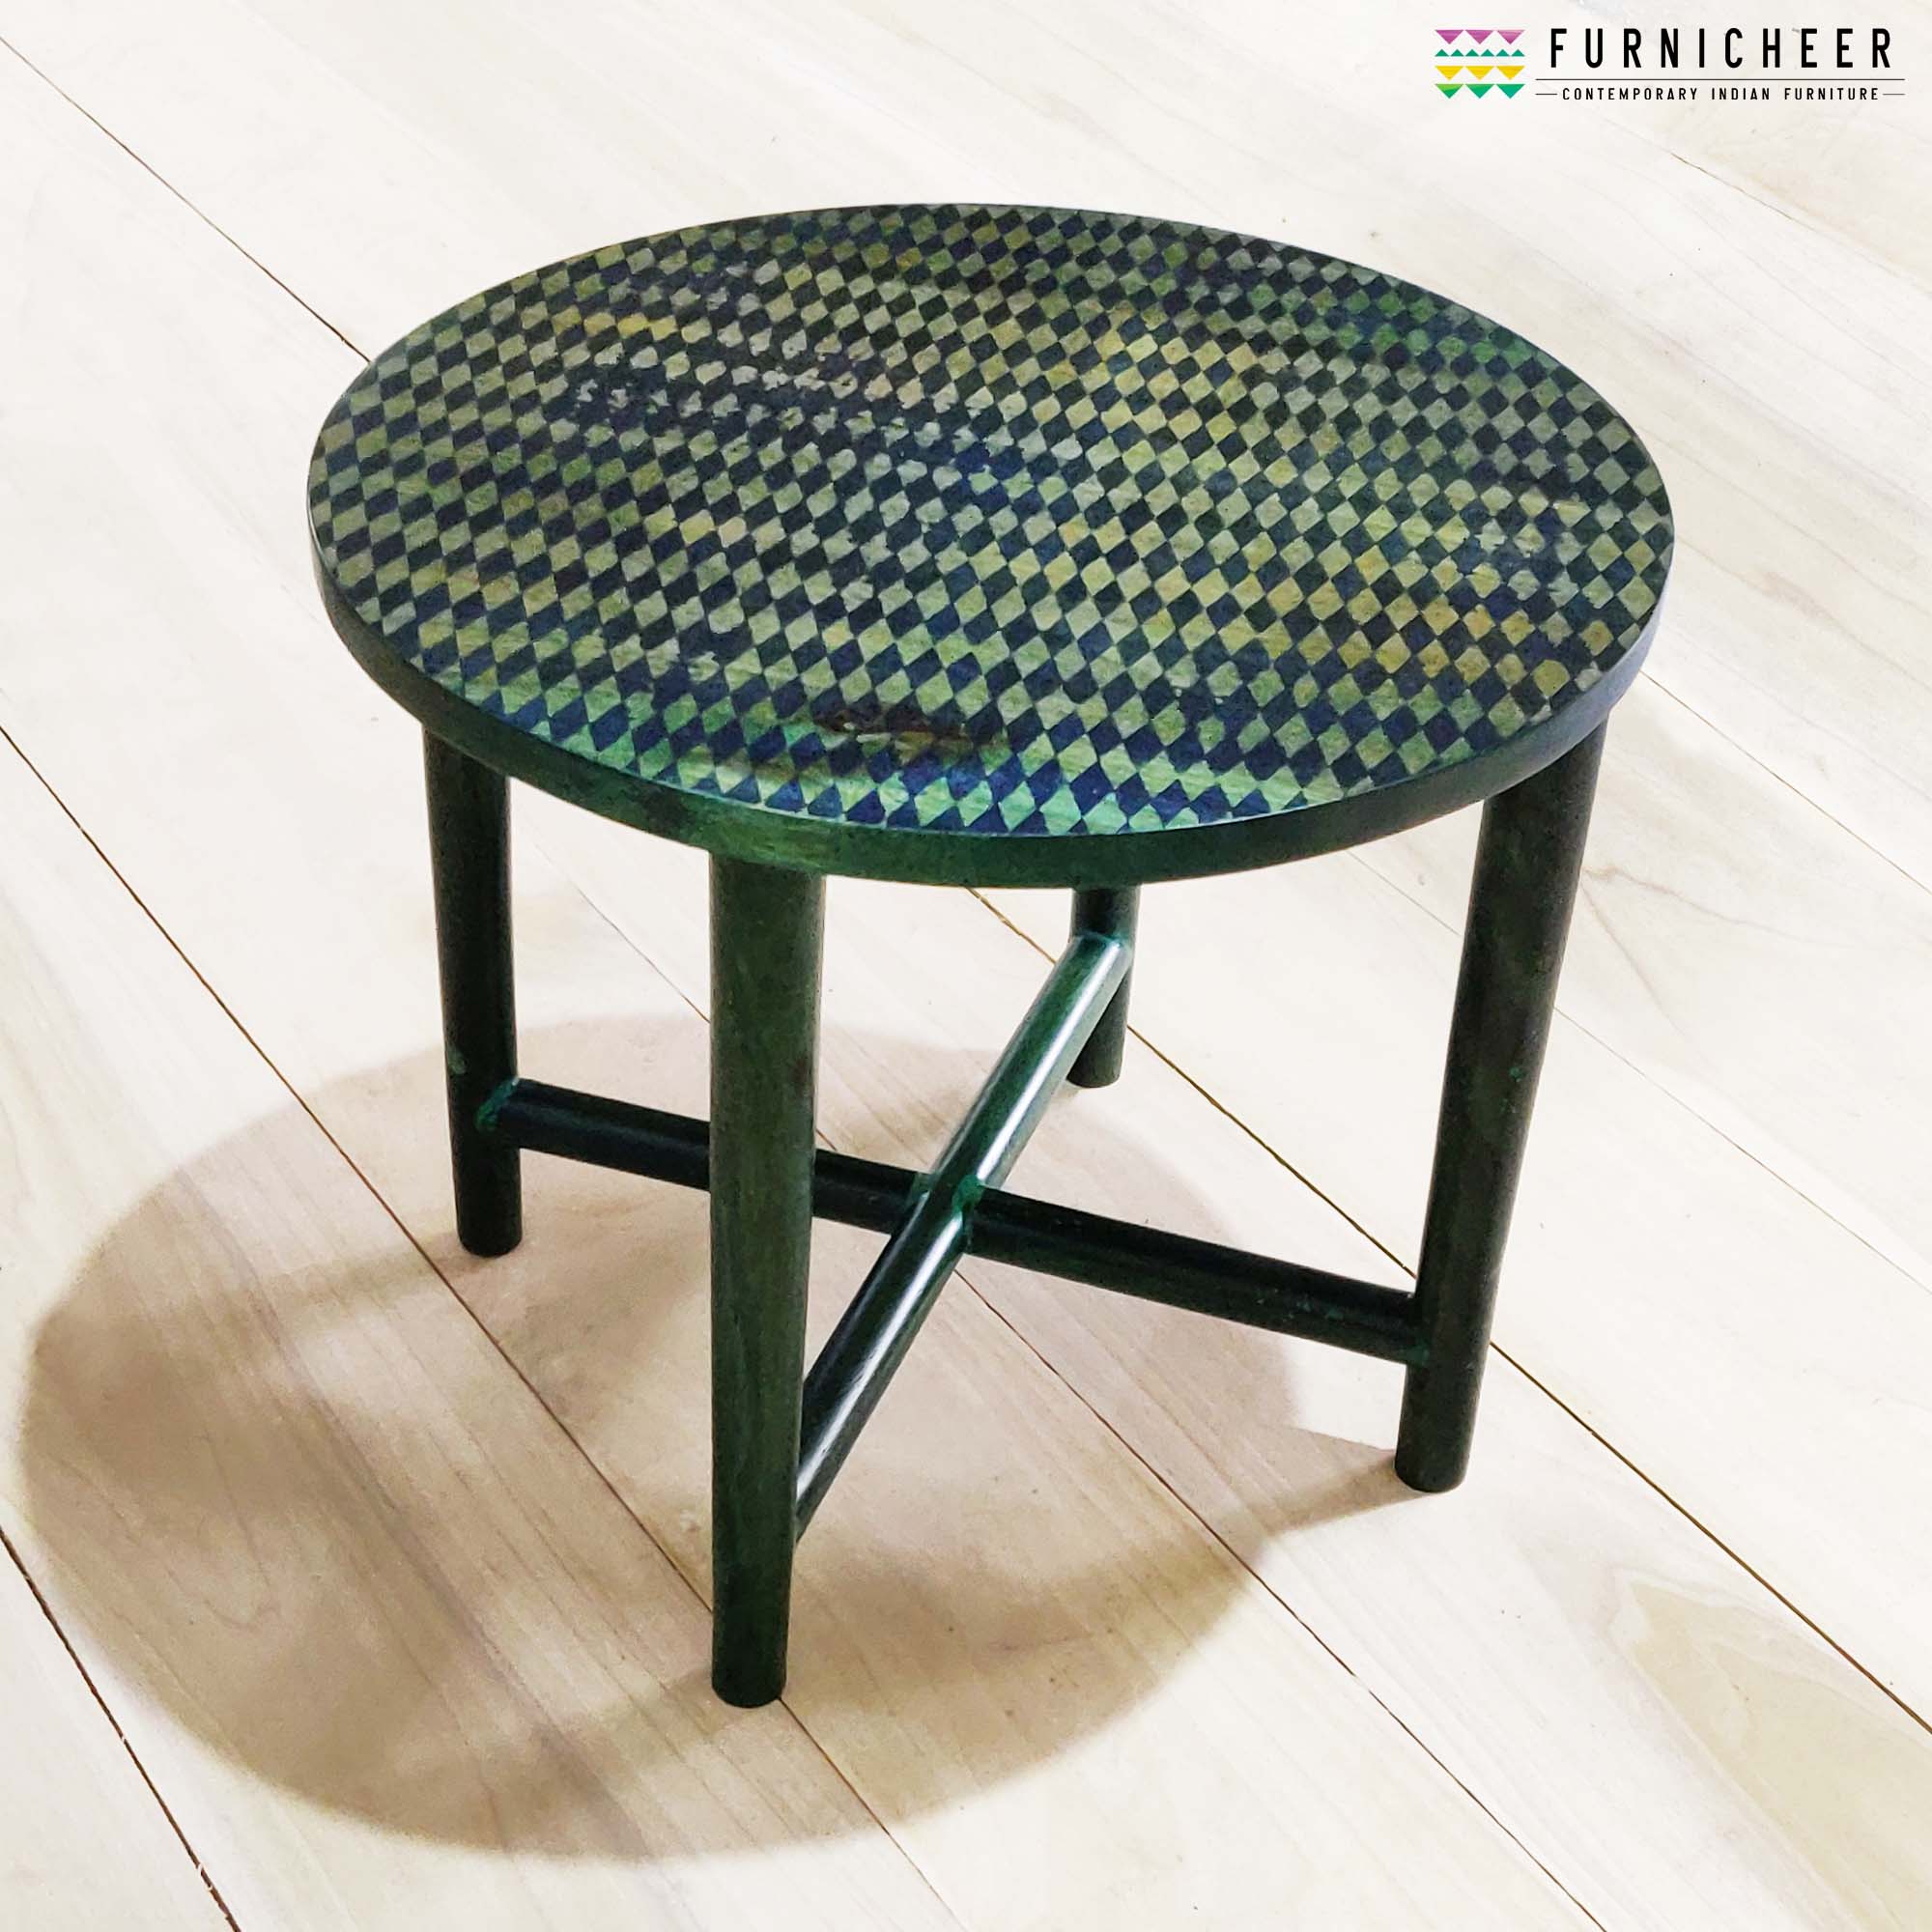 3.SIDE & END TABLE SKU GCST1614